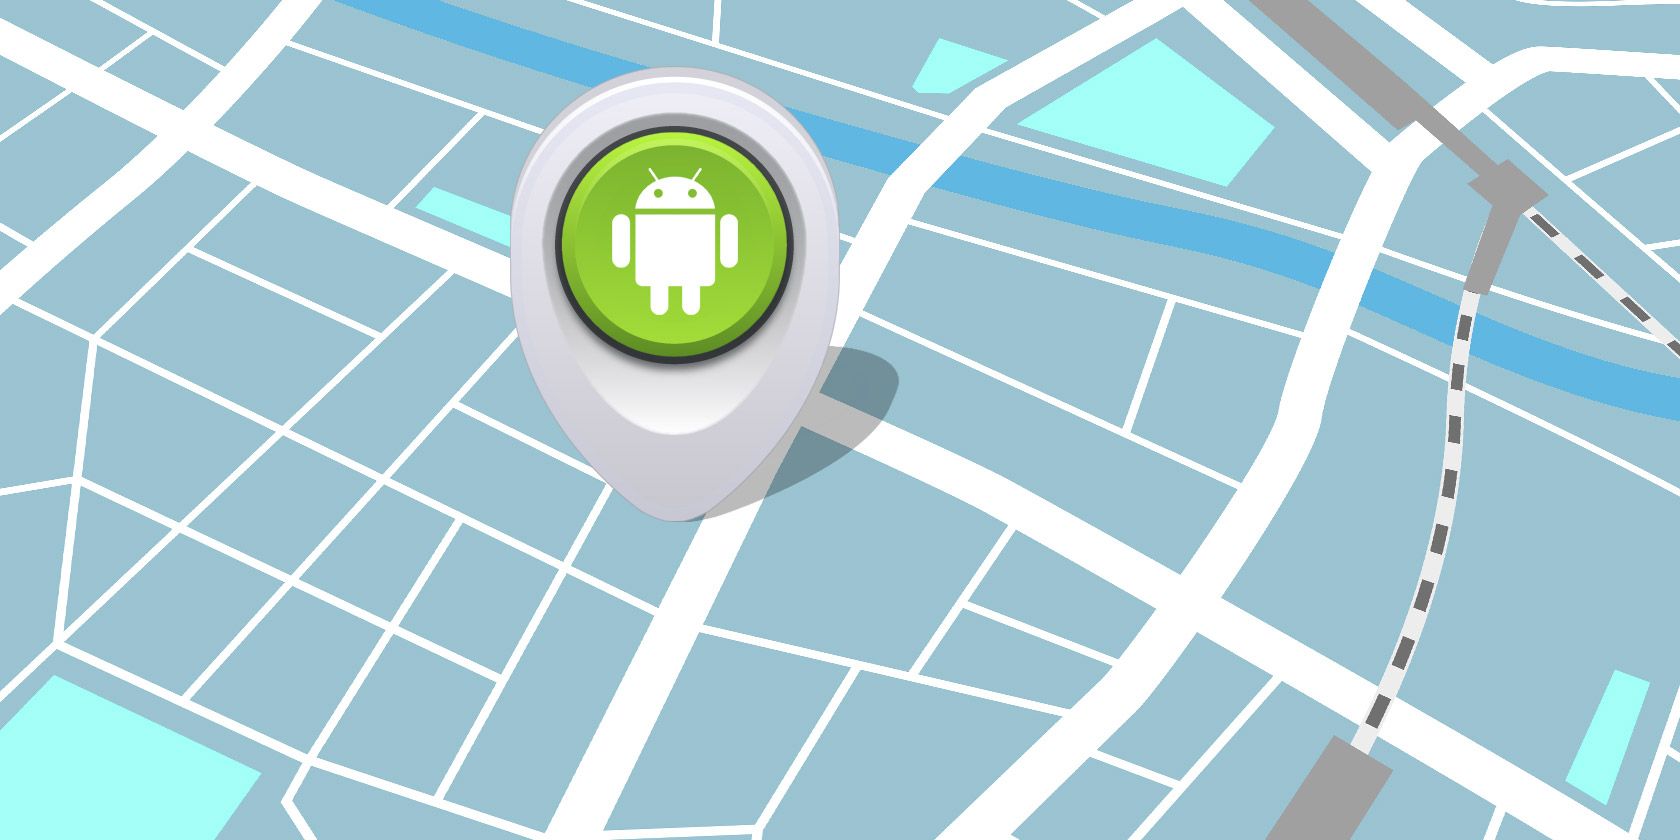 How to Trace and Find Your Phone’s Location